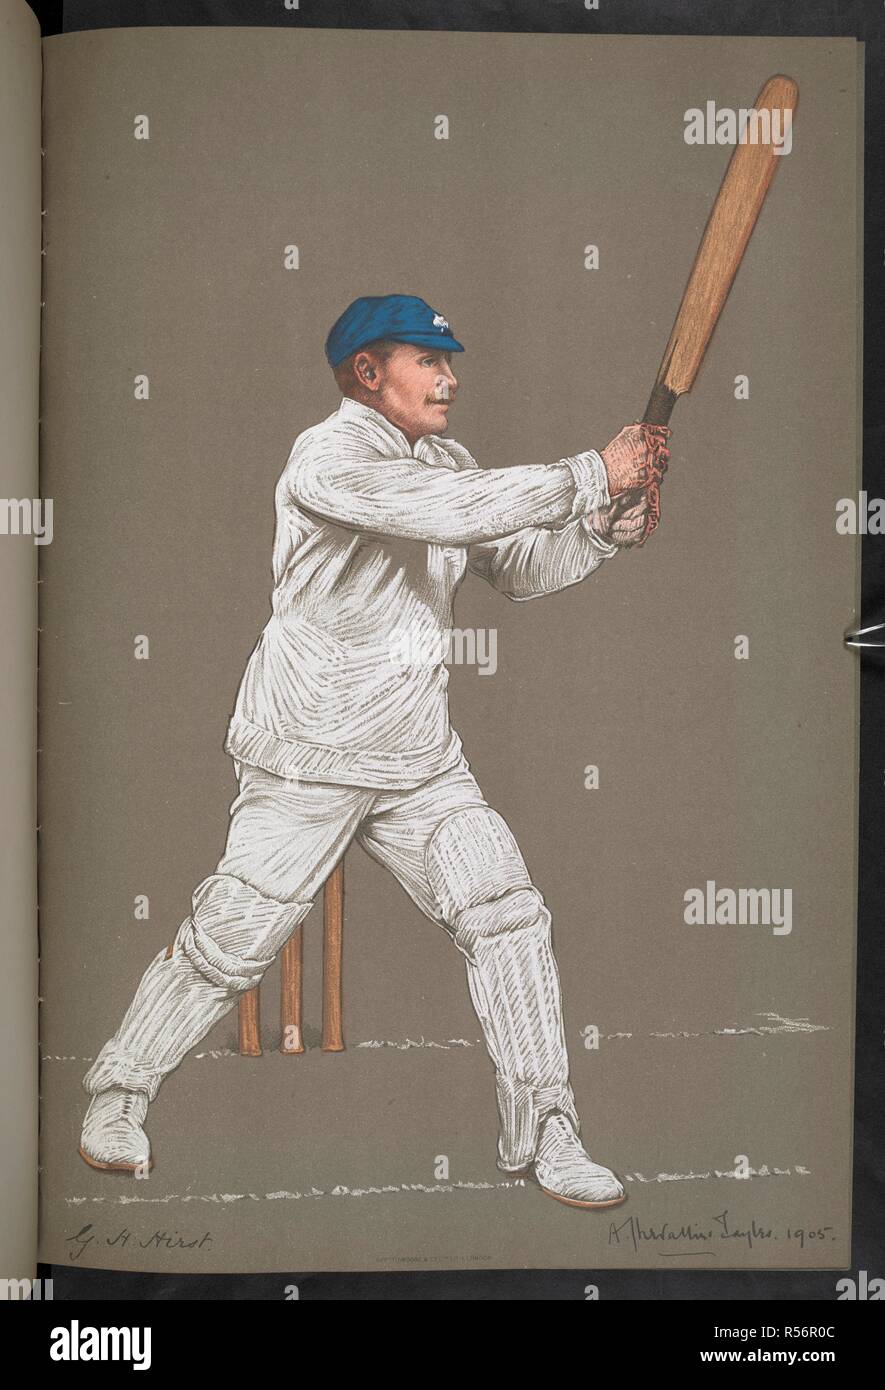 G. H. Hirst, Yorkshire. George Herbert Hirst (1871-1954) was a professional English cricketer who played first-class cricket for Yorkshire County Cricket Club between 1891 and 1921, with a further appearance in 1929. The Empire's Cricketers. From original drawings by A. Chevallier Tayler. With biographical sketches by G. W. Beldam. Season 1905 [48 plates with descriptive text.]. [London] : The Fine Art Society, Ltd. 148 New Bond Street, W., [1905]. Source: C.194.c.87, plate 23. Language: English. Stock Photo